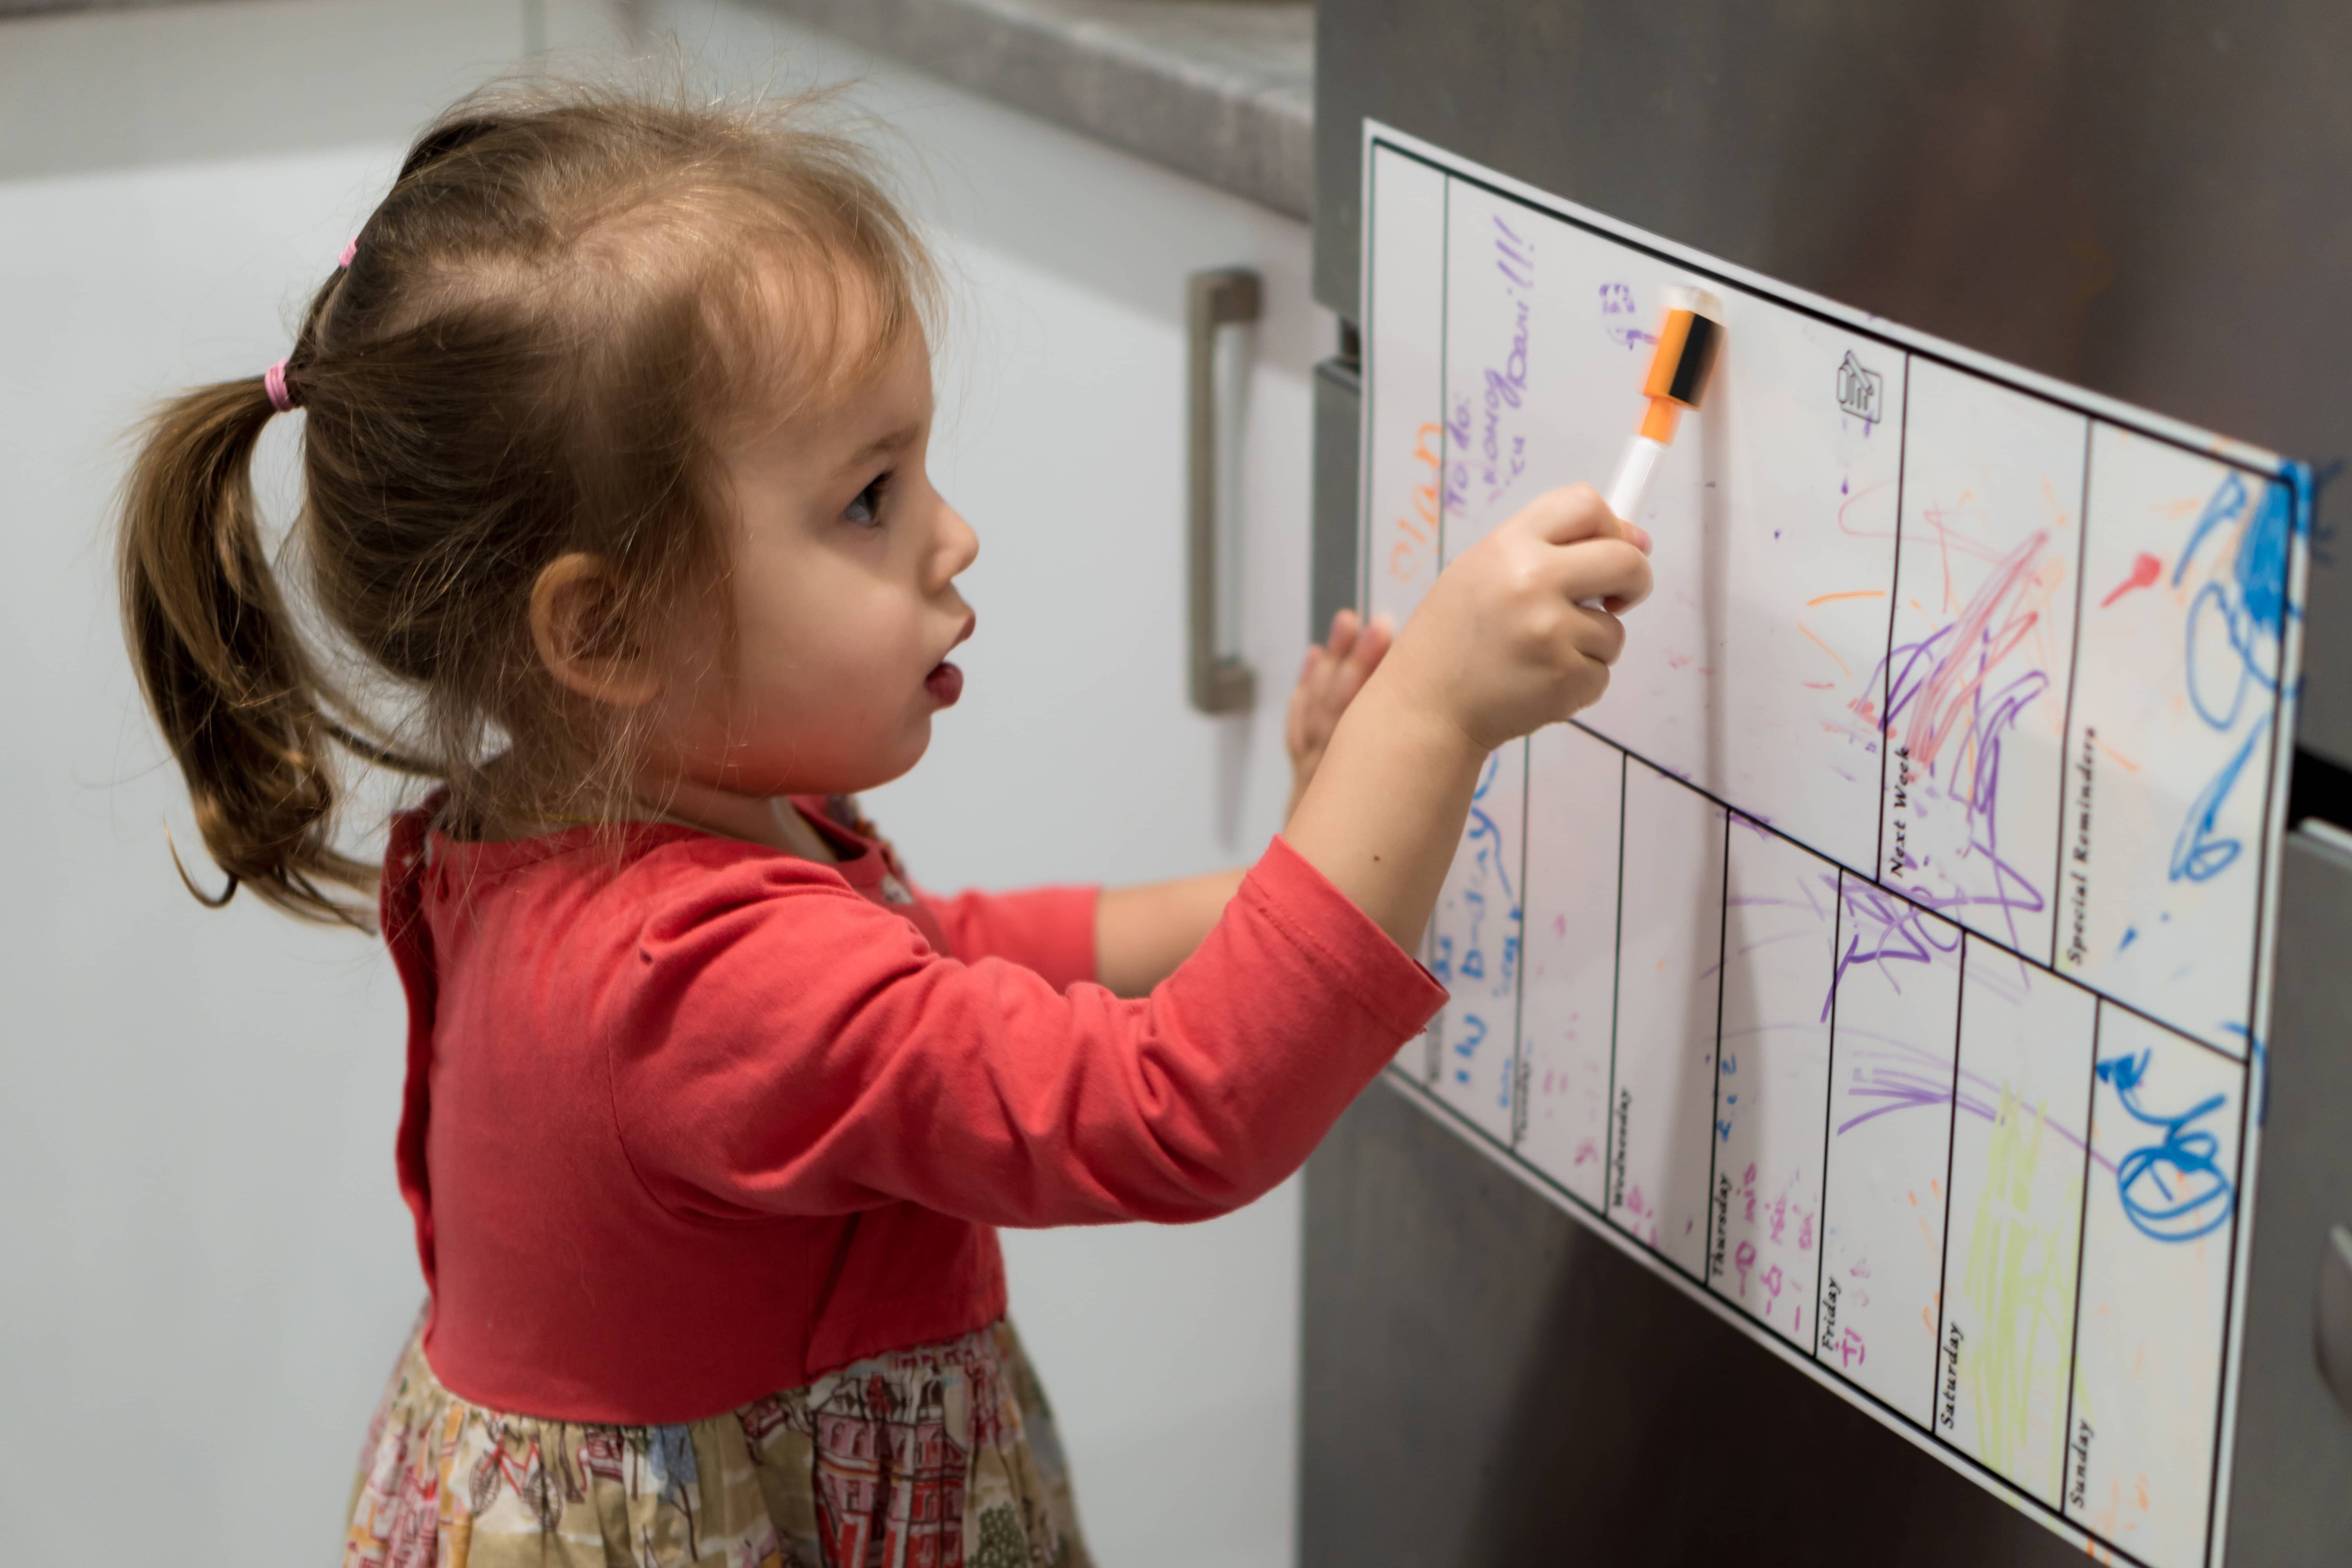 Little girl drawing with markers on a refrigerator calendar.